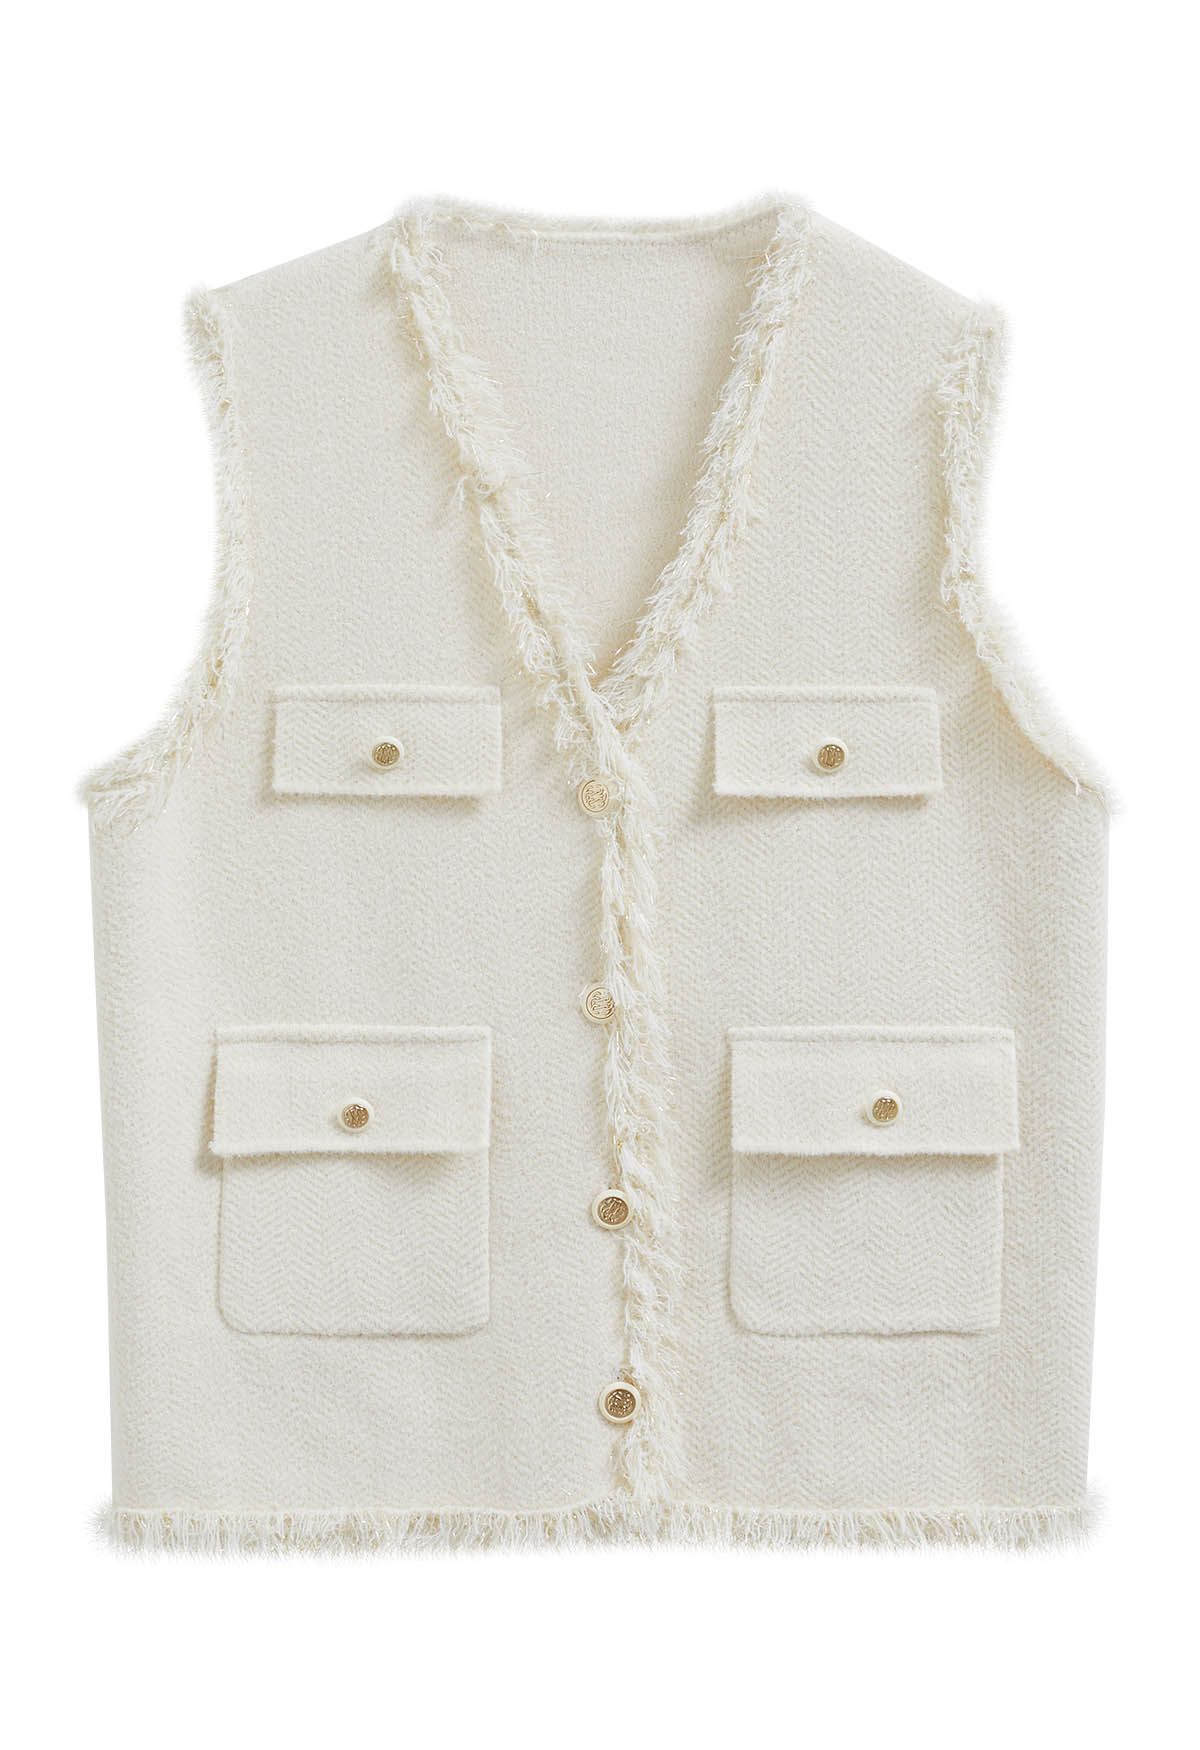 Fringed Edge Buttoned Flap Pocket Knit Vest in Cream